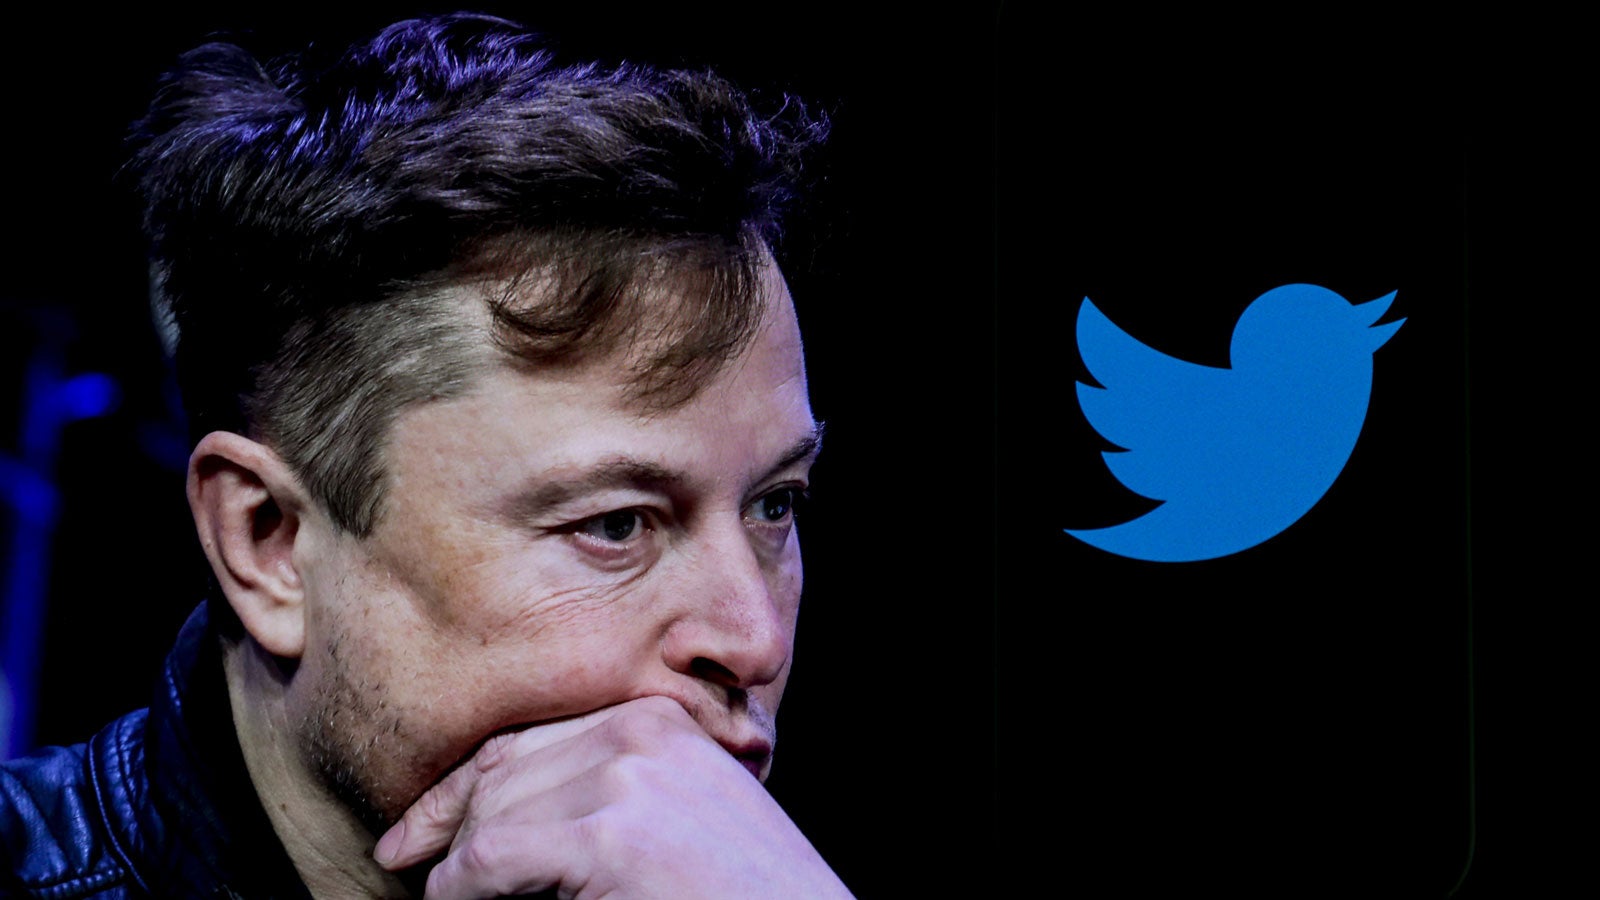 Elon Musk Briefly Wasn’t the World’s Richest Person Anymore According to Forbes